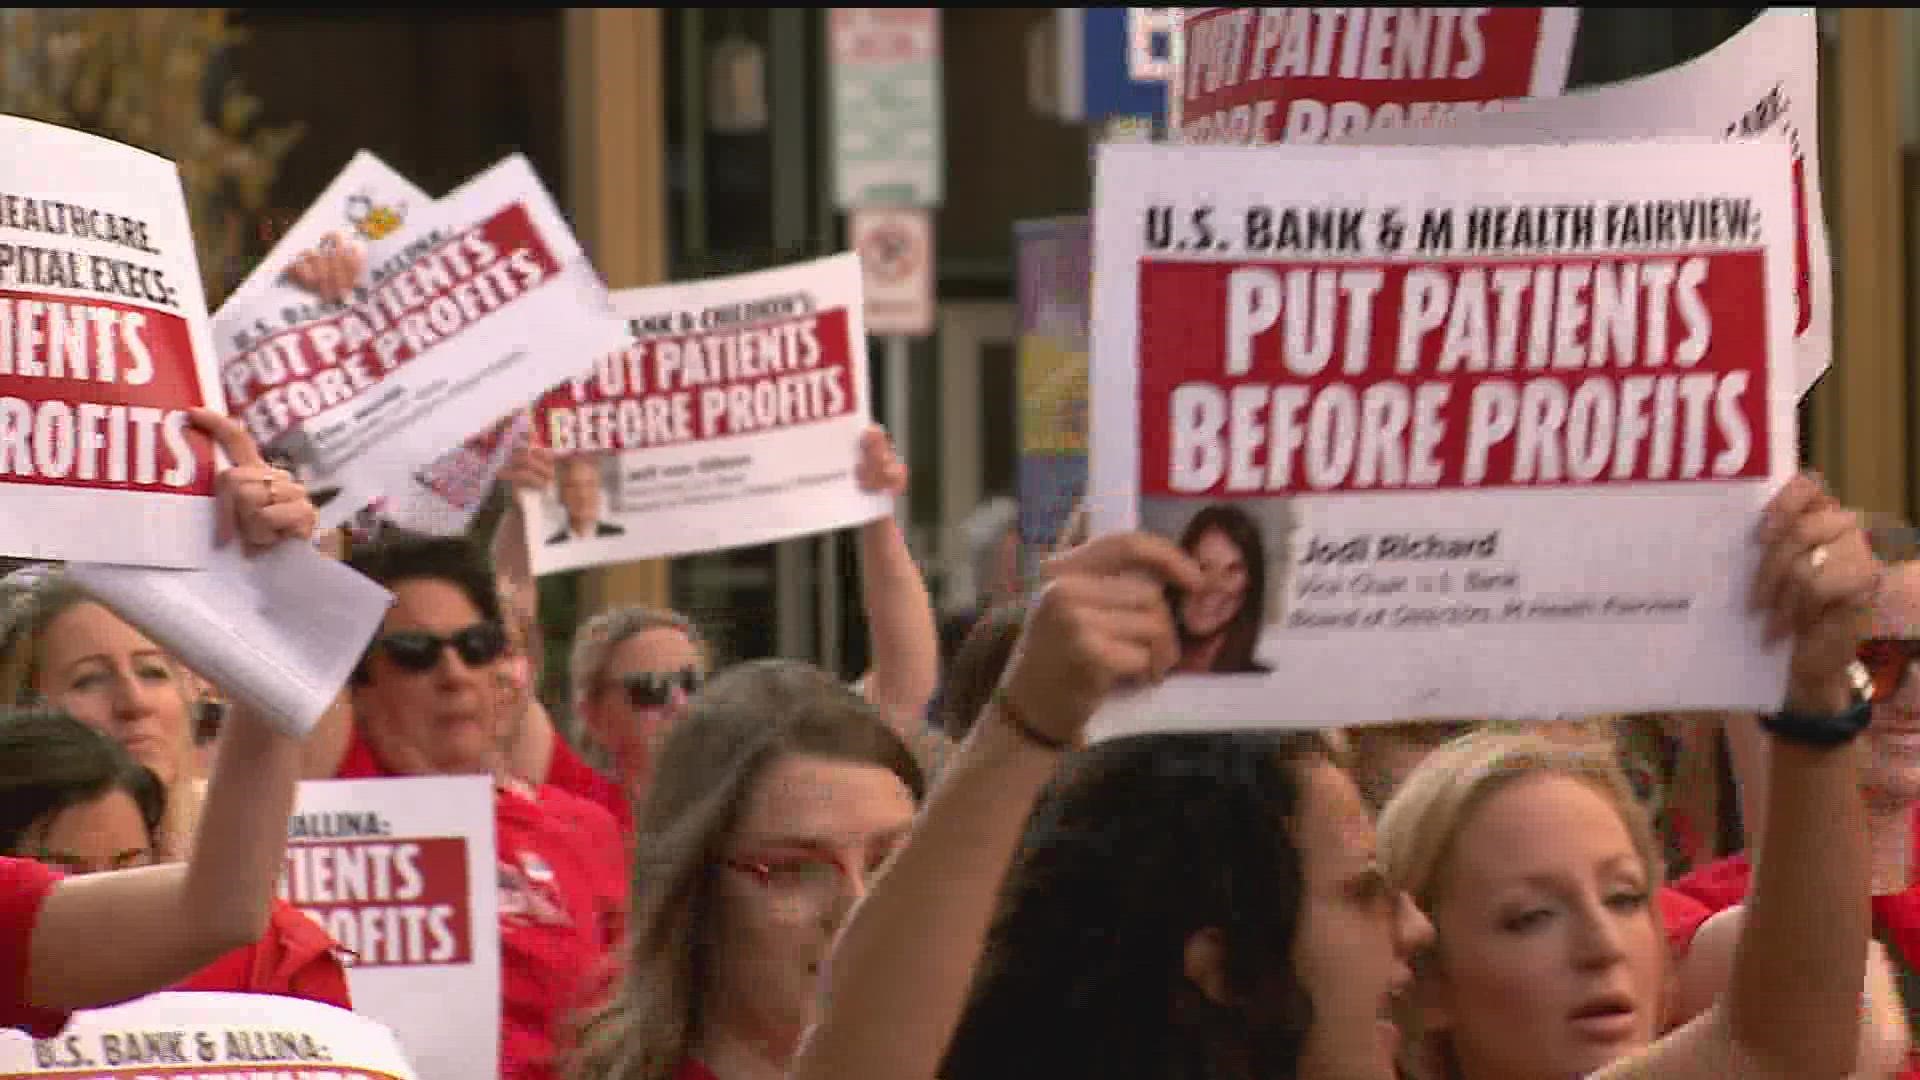 After making remarks outside U.S. Bancorp Center, hundreds of nurses went into the building, then marched to Wells Fargo.